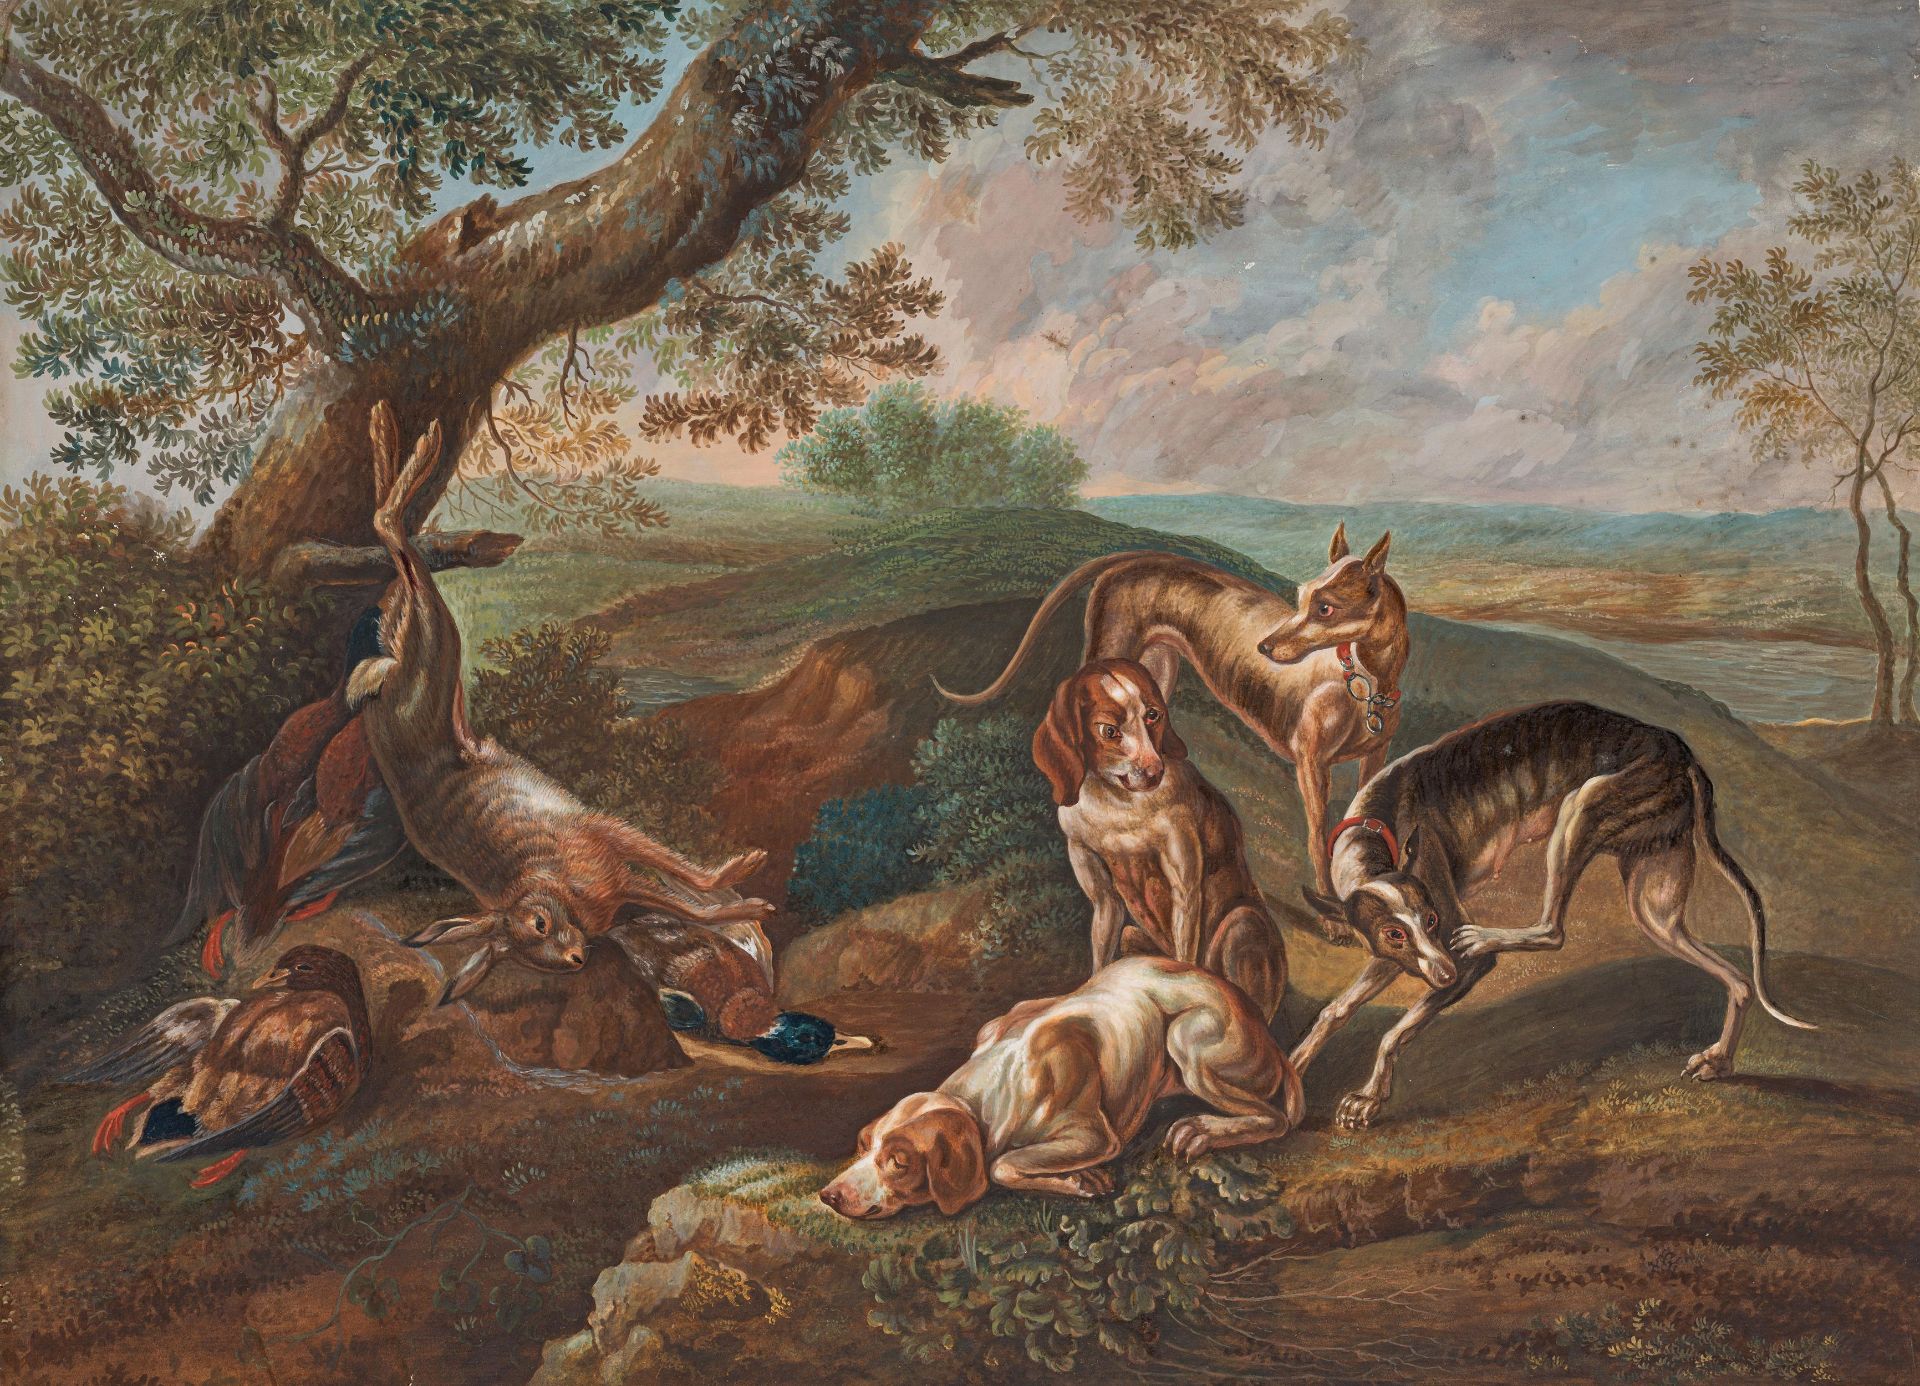 Artist of the 18th century: Hunting dogs with their prey